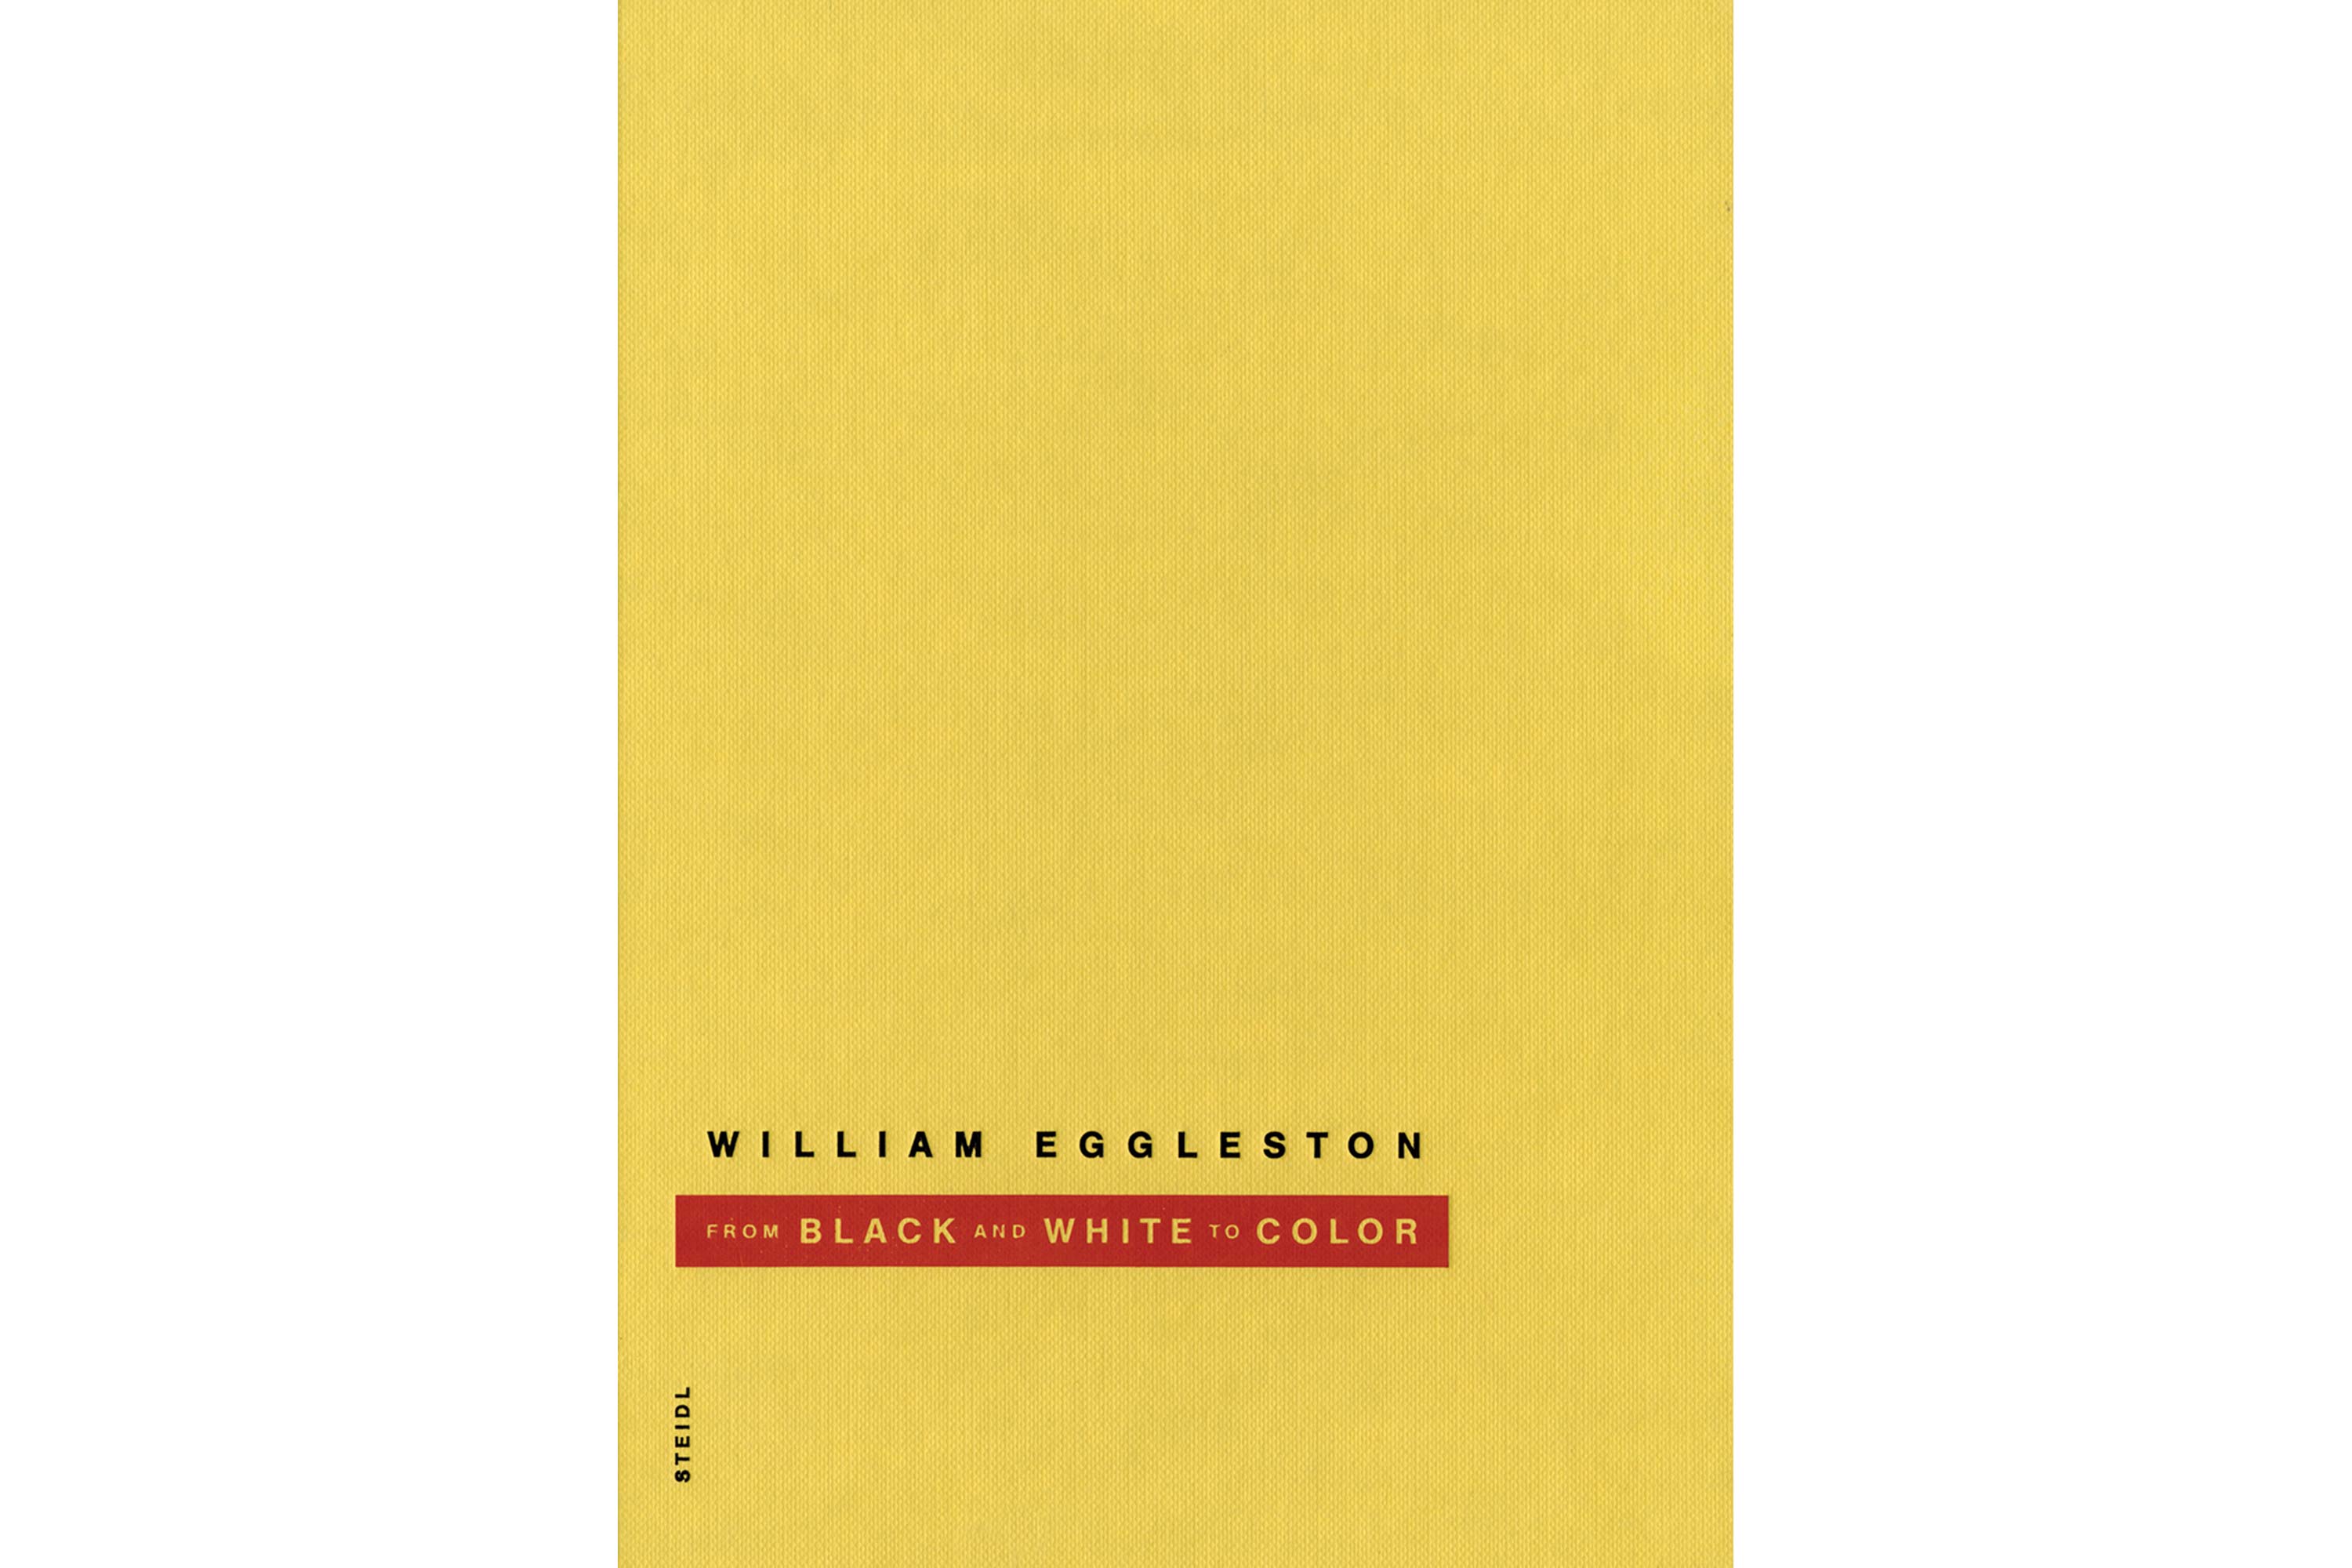 William Eggleston: From Black and White to Color | David Zwirner Books